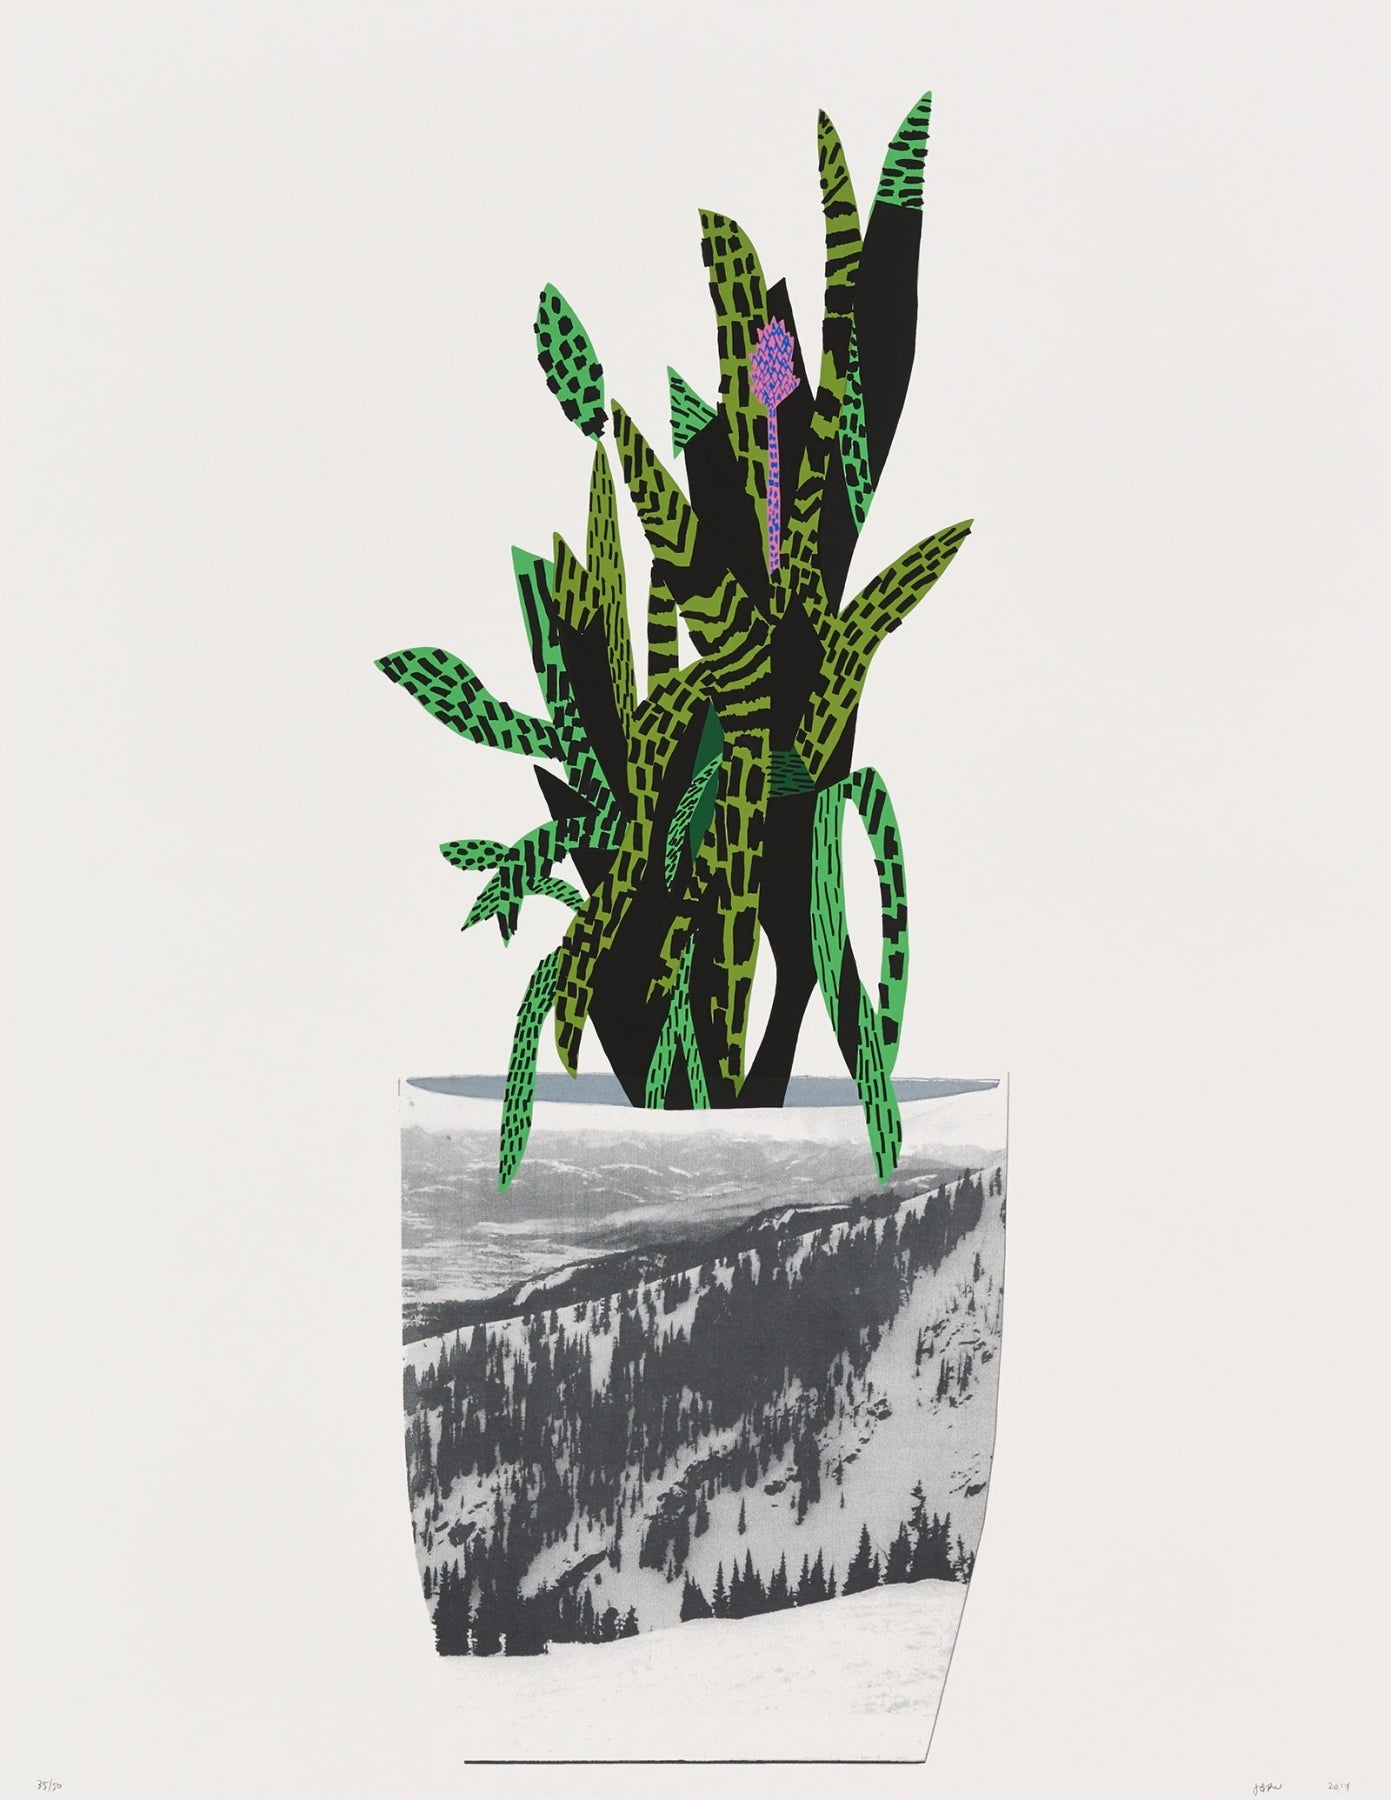 Untitled (Green), 2014